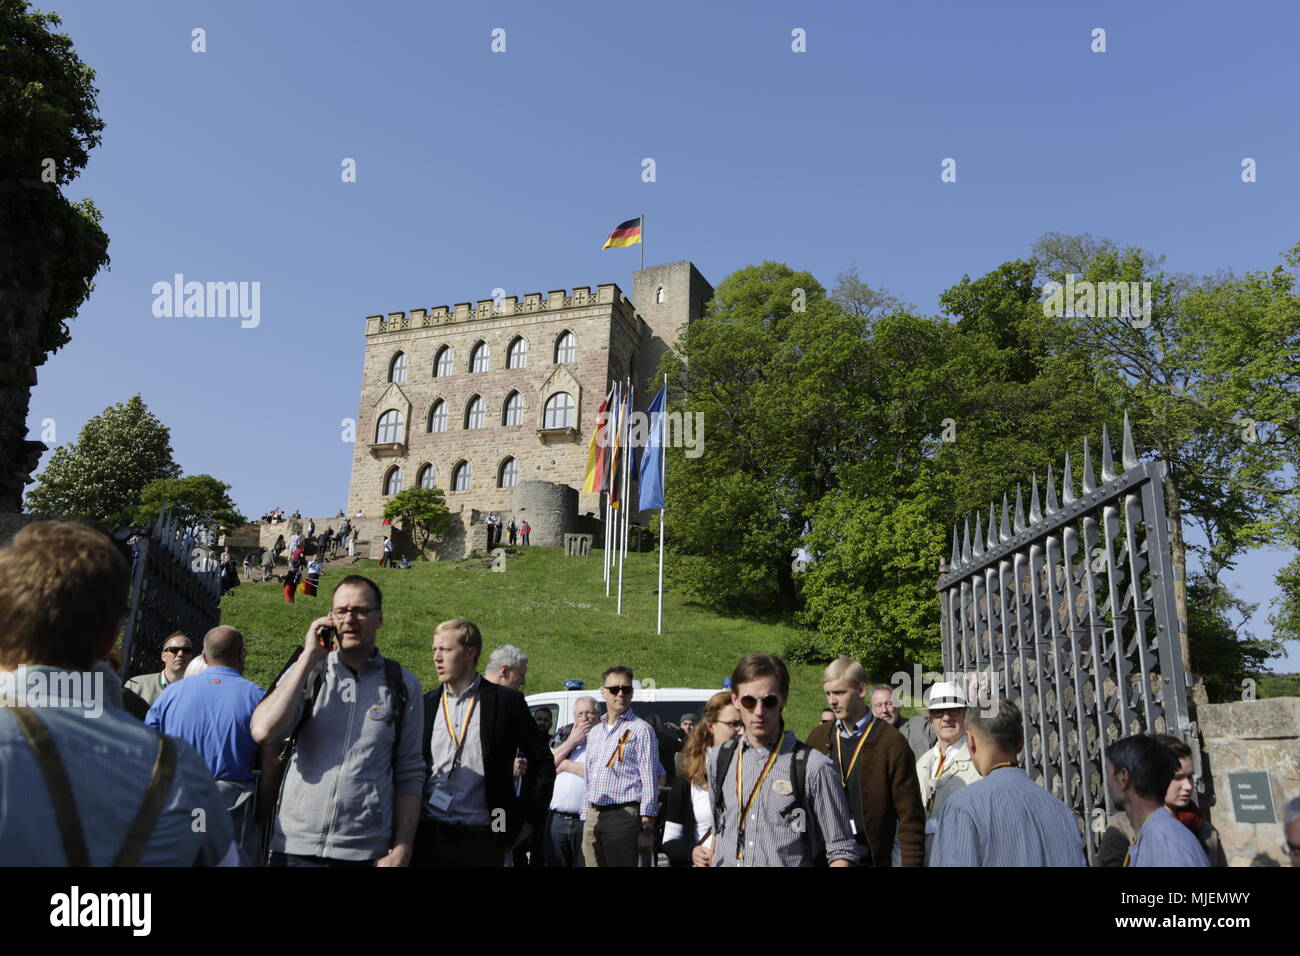 Neustadt, Germany. 5th May 2018. People queue outside the Haibach castle to get into it for the New Hambach Festival. The New Hambach Festival, organised by national-conservative and members of the new right, took place at the Hambach Castle. Organised by controversial Christian Democratic Union of Germany) member and Alternative for Germany) sympathiser Max Otte, it sees controversial speakers such as Thilo Sarrazin, Vera Lengsfeld and Federal spokesman for the AfD Jorg Meuthen. Credit: Michael Debets/Alamy Live News Stock Photo